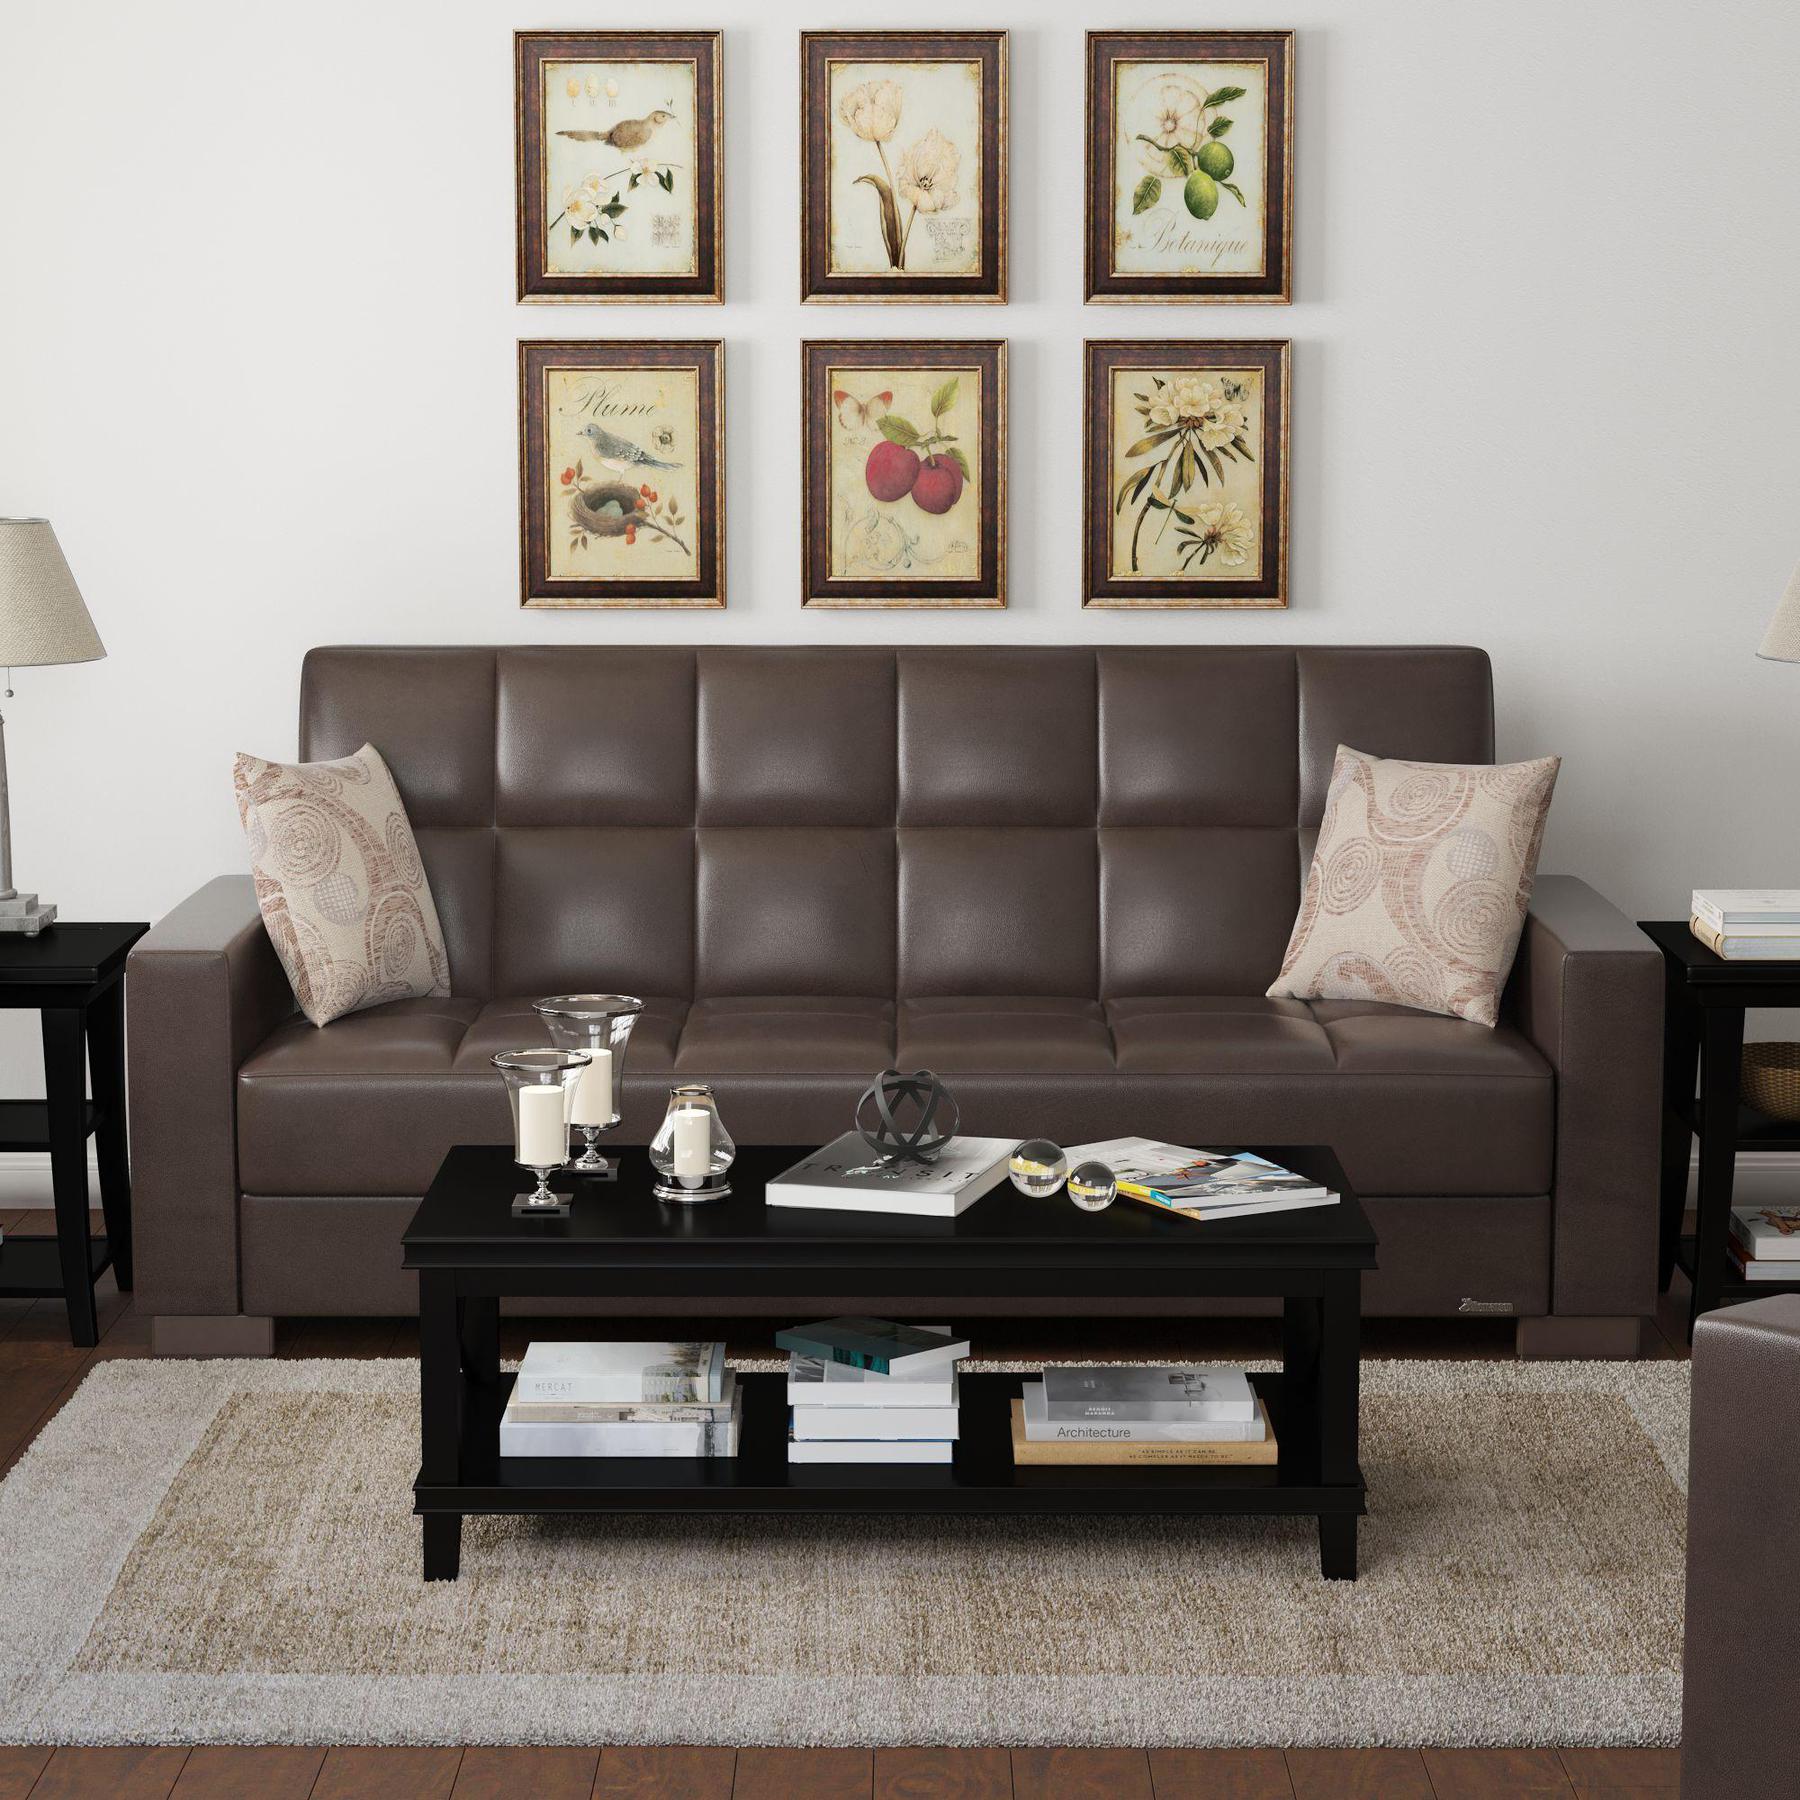 Modern design, Dark Brown , Artificial Leather upholstered convertible sleeper Sofabed with underseat storage from Voyage Track by Ottomanson in living room lifestyle setting by itself. This Sofabed measures 90 inches width by 36 inches depth by 41 inches height.